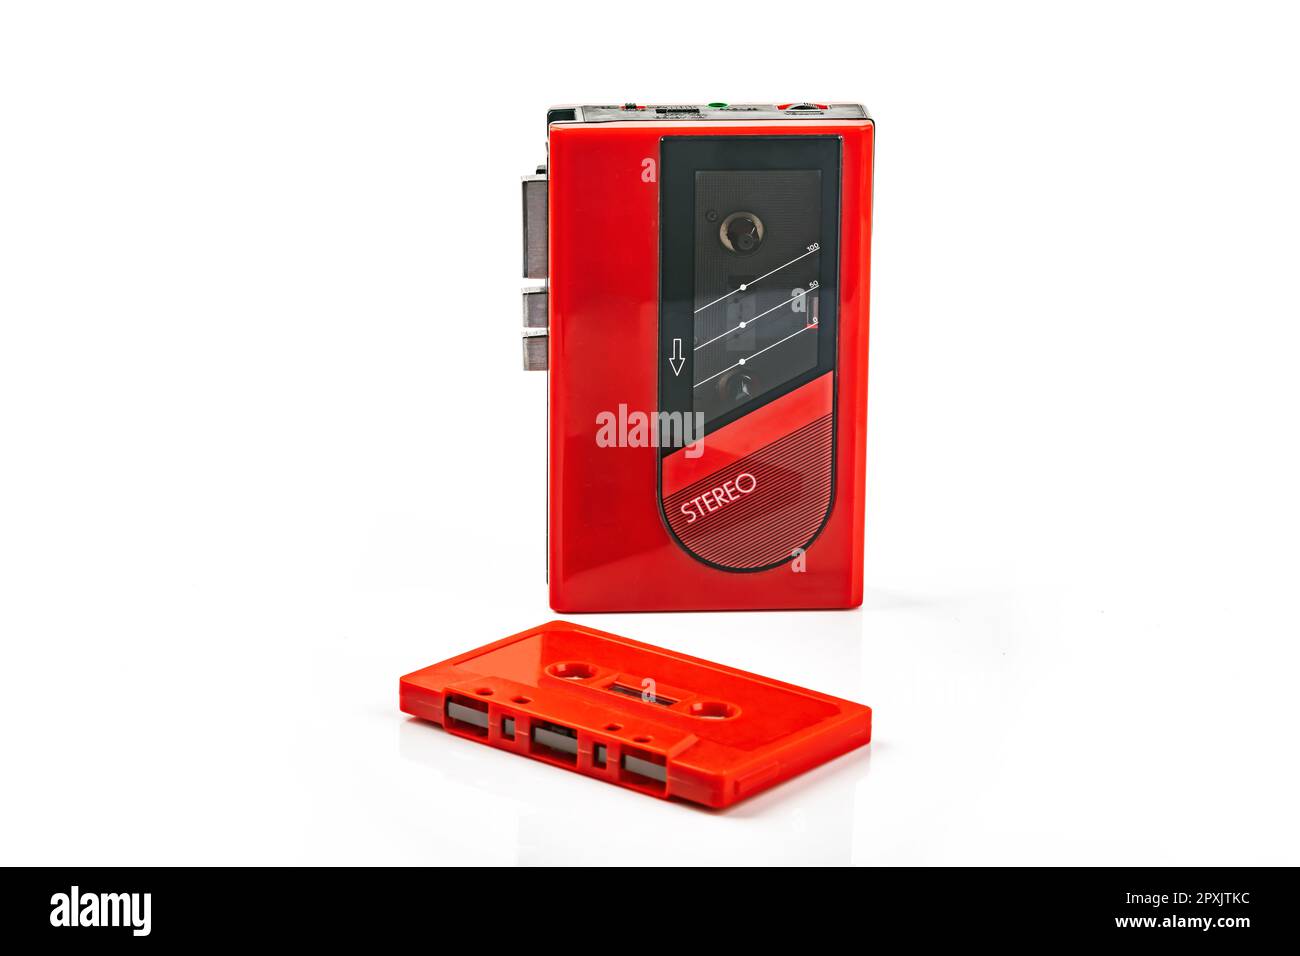 Beautiful red vintage audio cassette player over white background Stock Photo